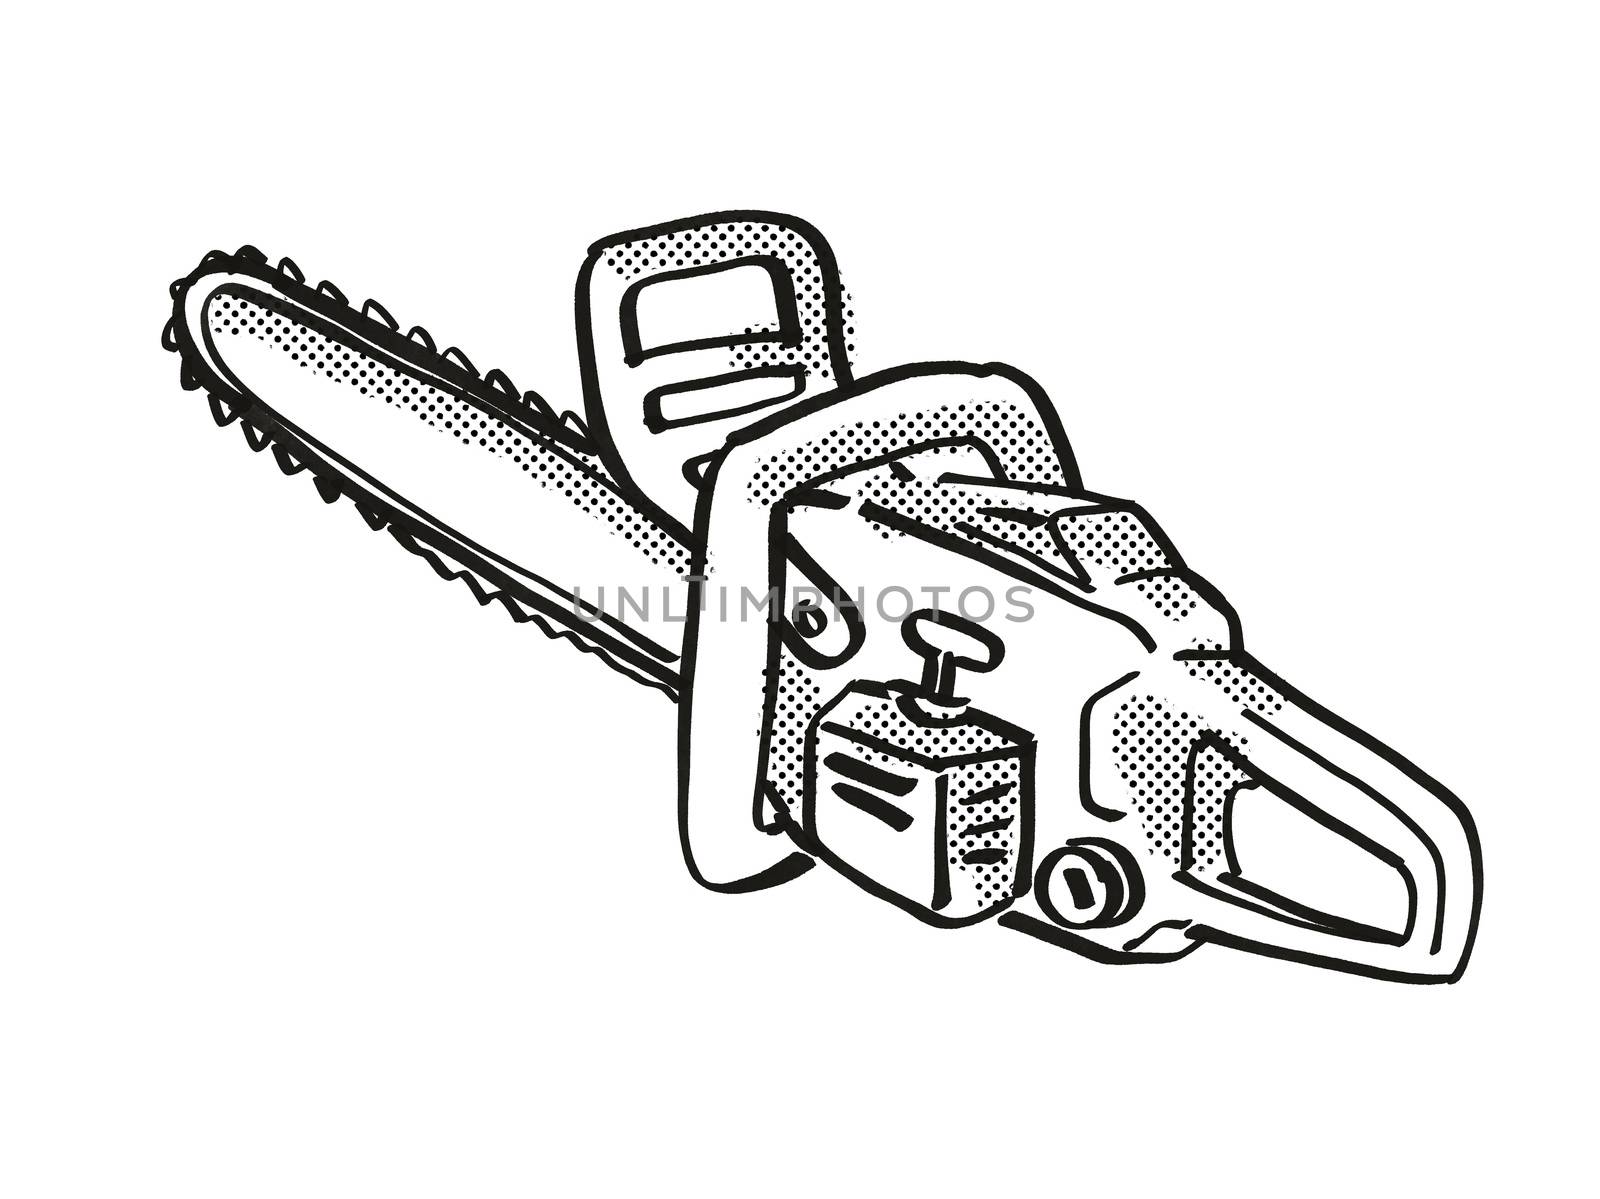 Retro cartoon style drawing of a chainsaw or Chain saw, a power tool or equipment on isolated white background done in black and white.